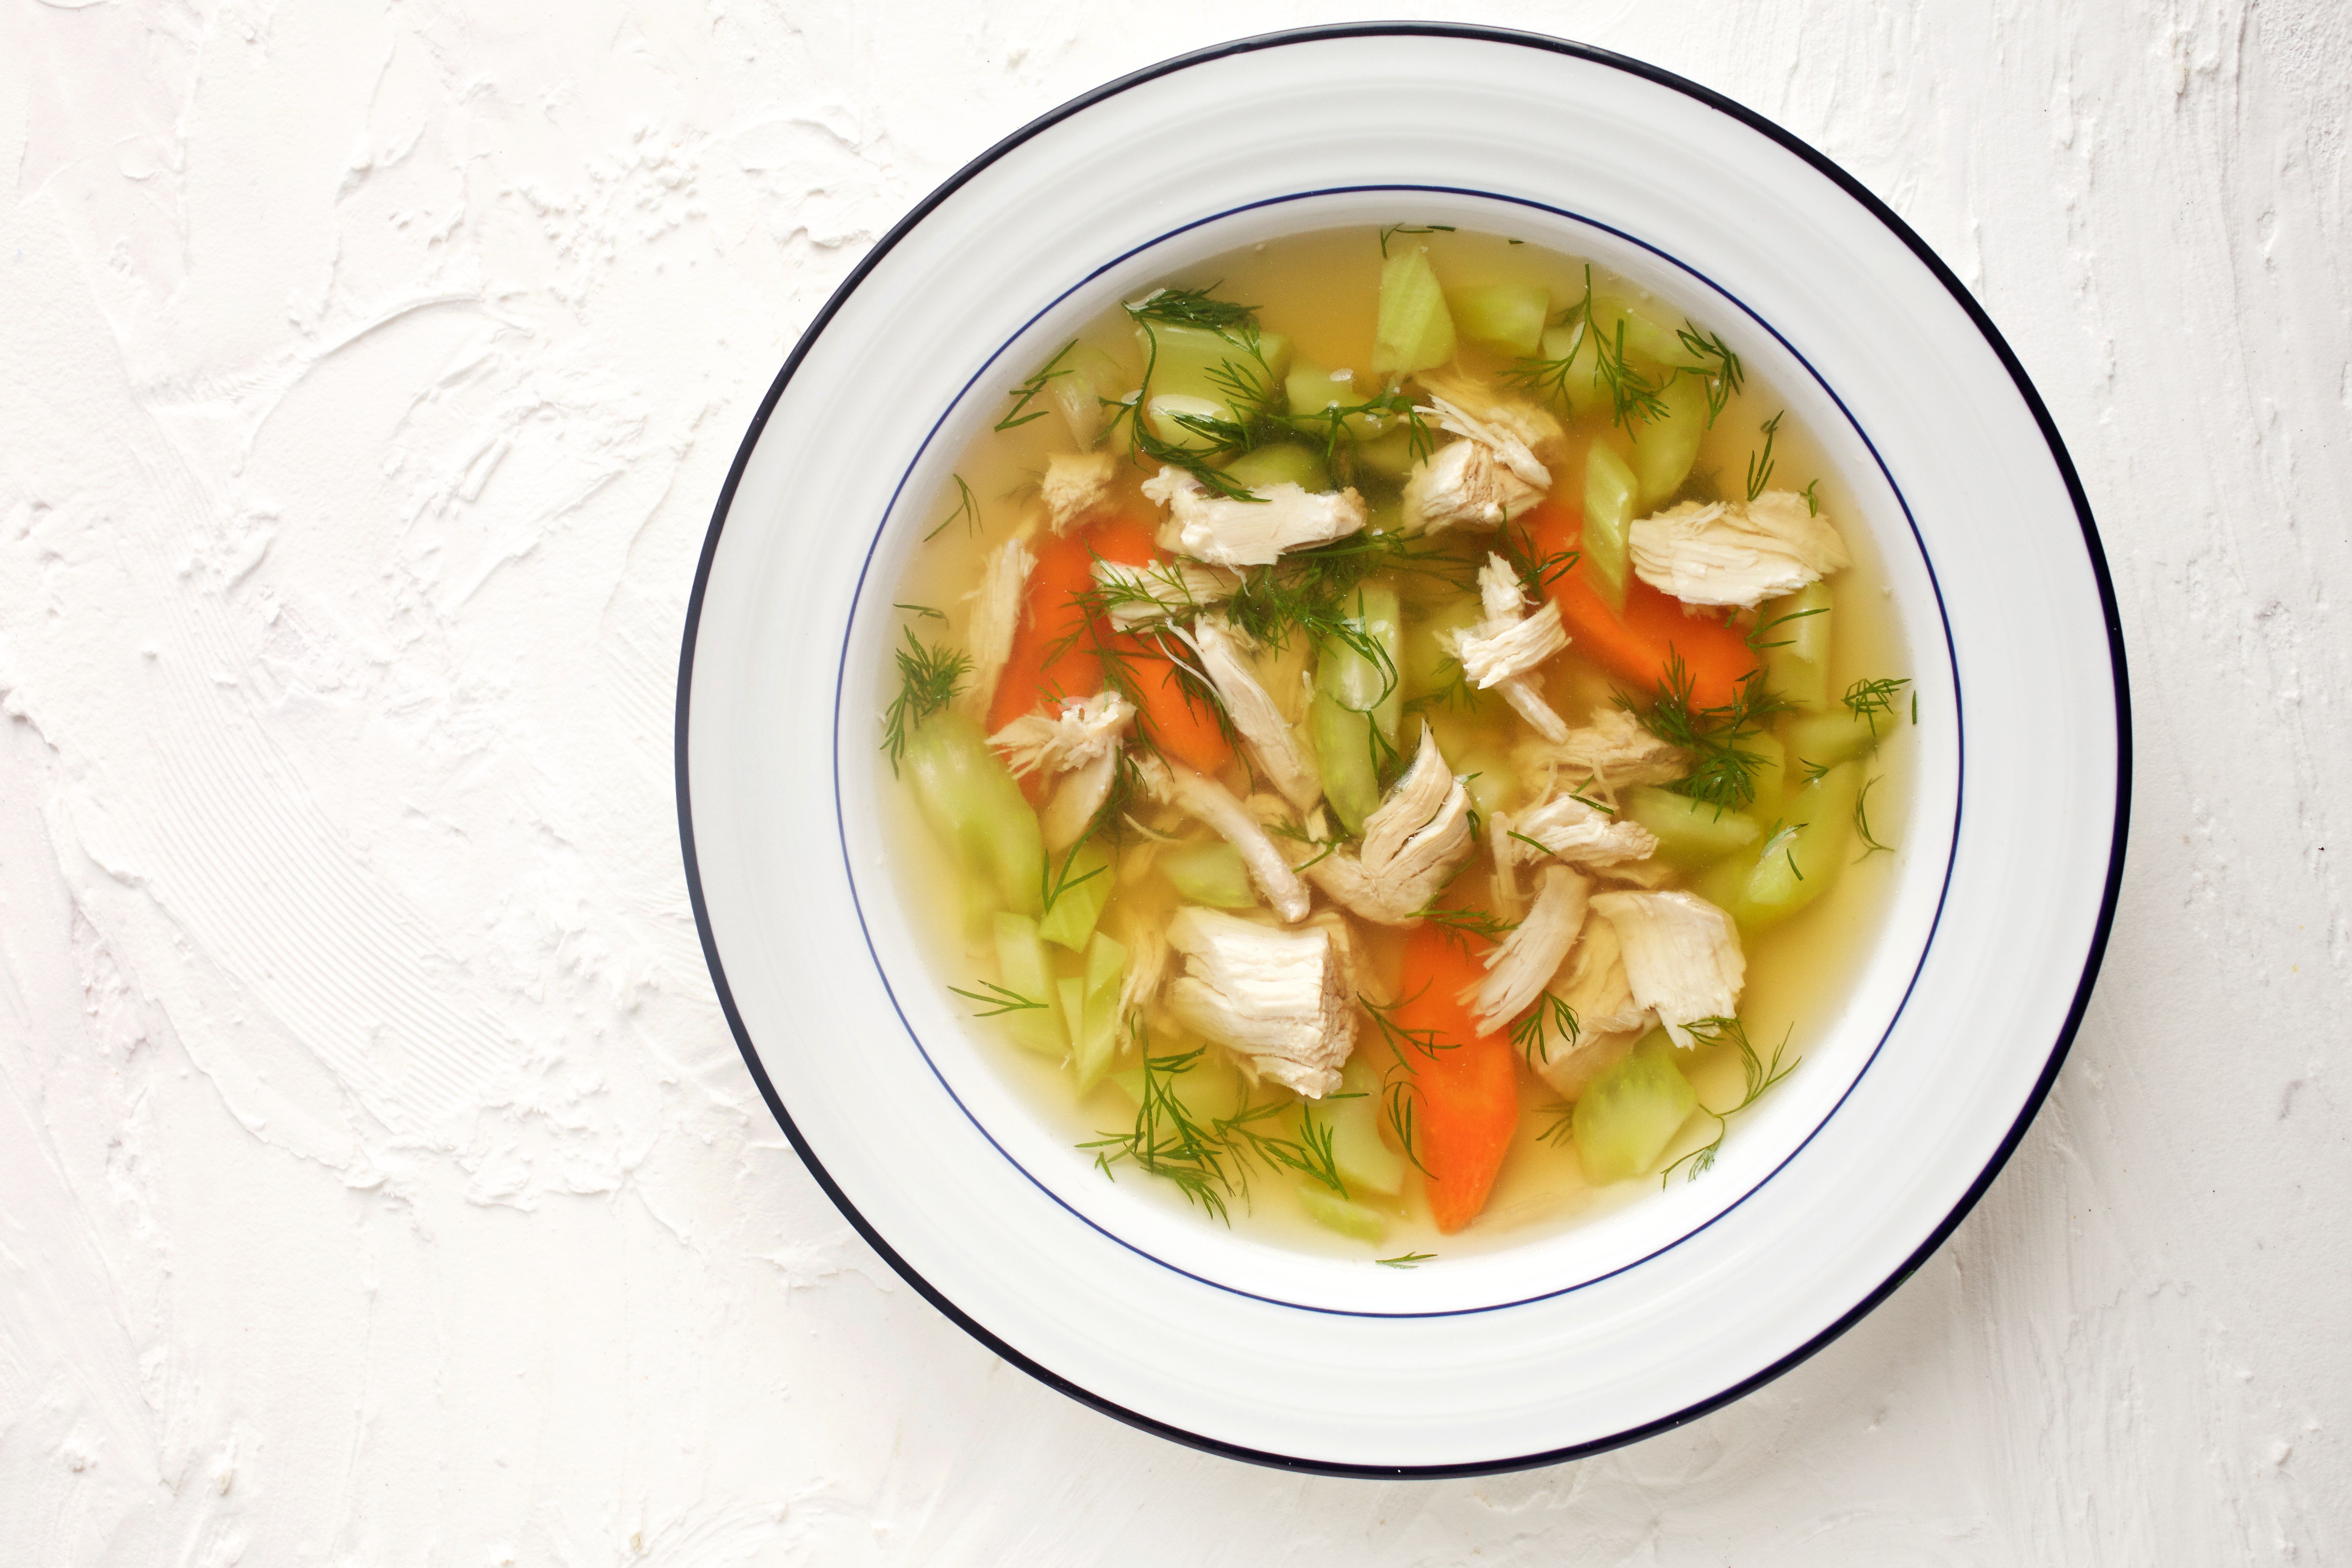 https://hips.hearstapps.com/hmg-prod/images/chicken-soup-with-benefits-photographed-in-washington-dc-news-photo-1678114593.jpg